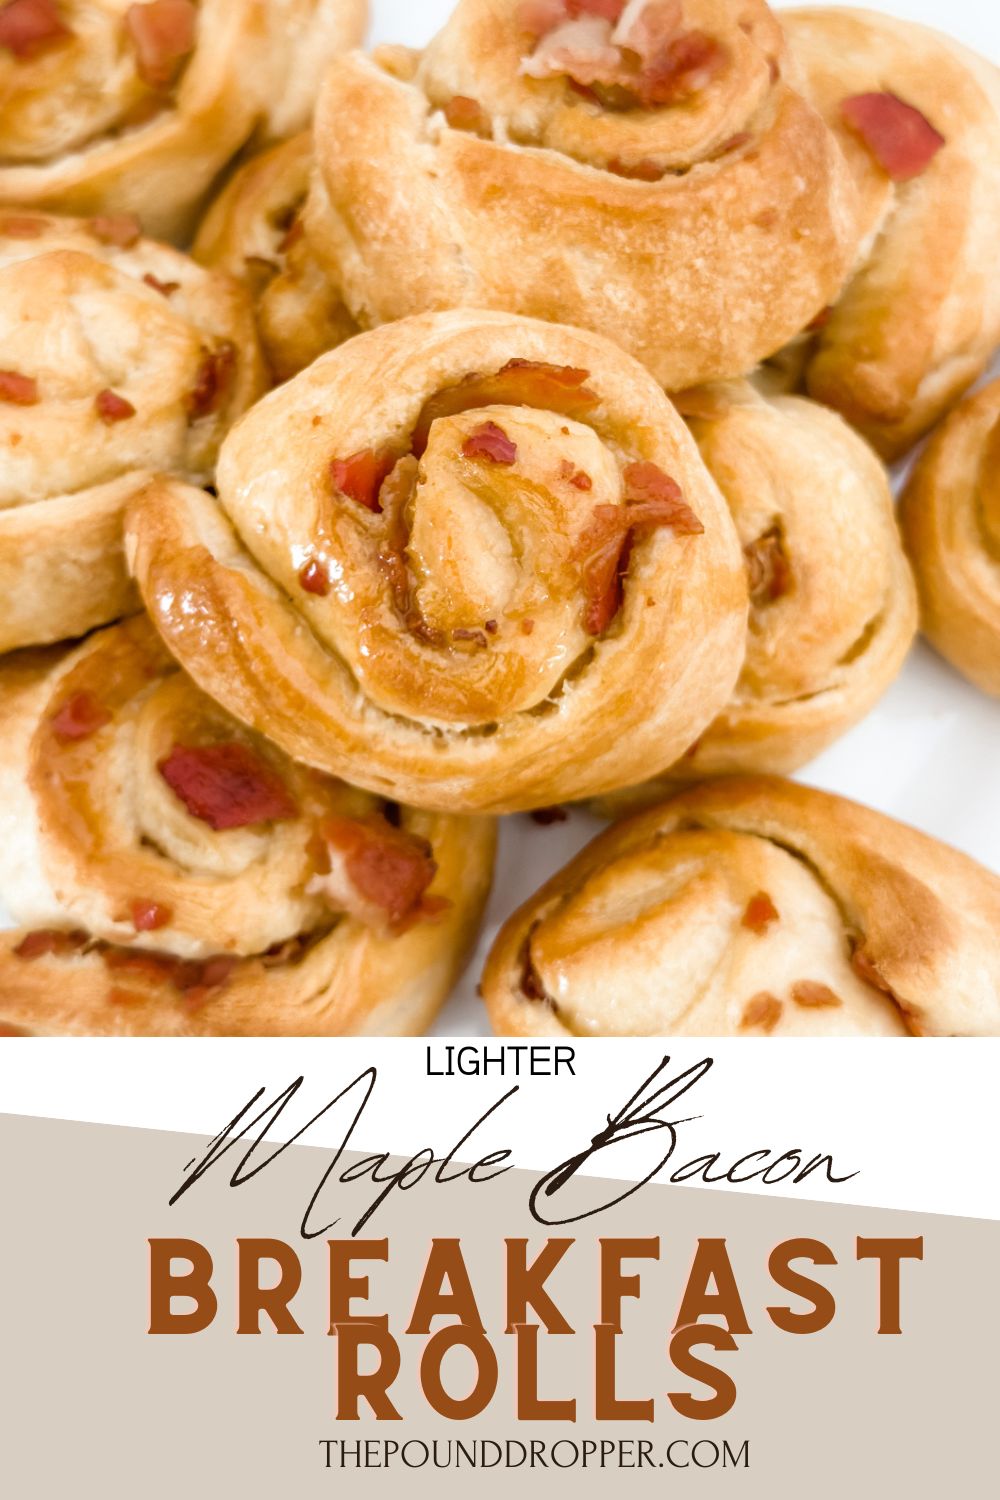 These Lighter Maple Bacon Breakfast Rolls make for an easy side for brunch, snack, or pair them with fluffy scrambled eggs and fruit for a delicious breakfast meal! via @pounddropper